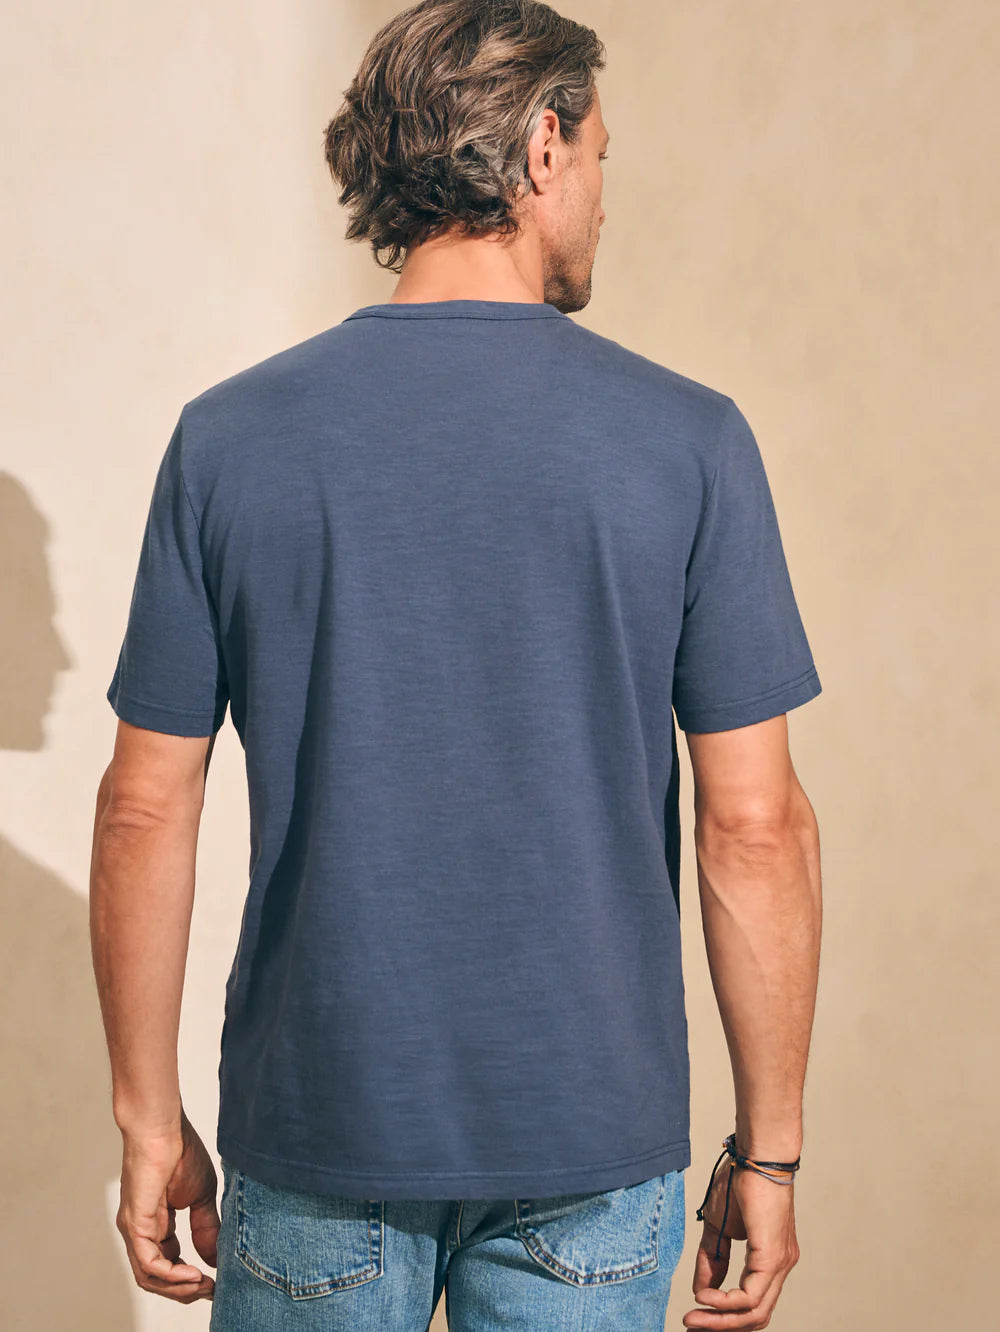 Back view of man wearing the short sleeve Sunwashed Tee in Dune Navy by Faherty